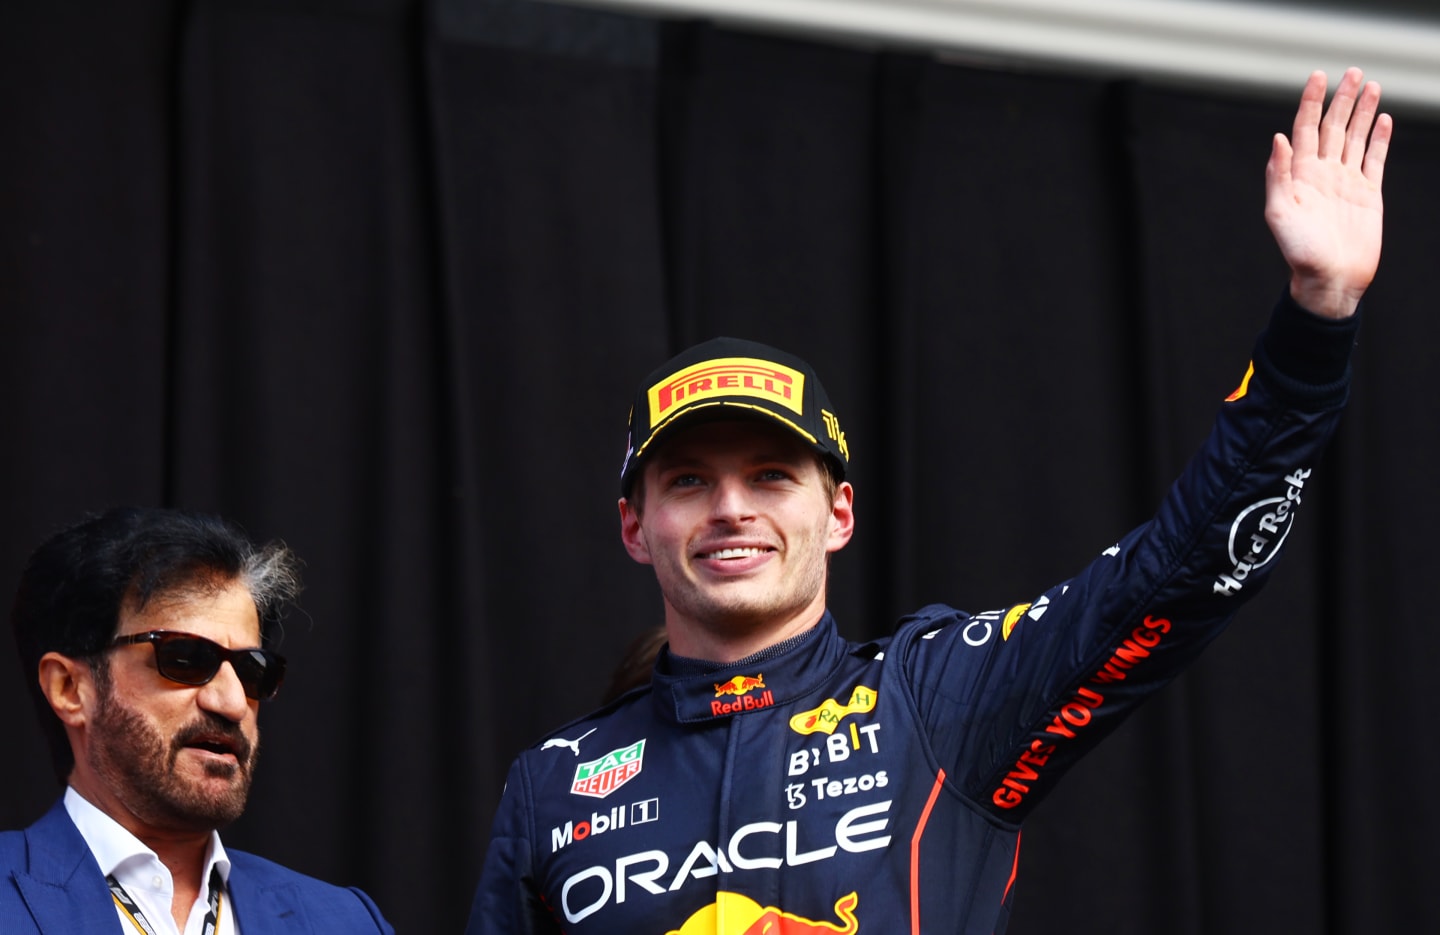 SPA, BELGIUM - AUGUST 28:  Race winner Max Verstappen of the Netherlands and Oracle Red Bull Racing celebrates on the podium during the F1 Grand Prix of Belgium at Circuit de Spa-Francorchamps on August 28, 2022 in Spa, Belgium. (Photo by Mark Thompson/Getty Images)